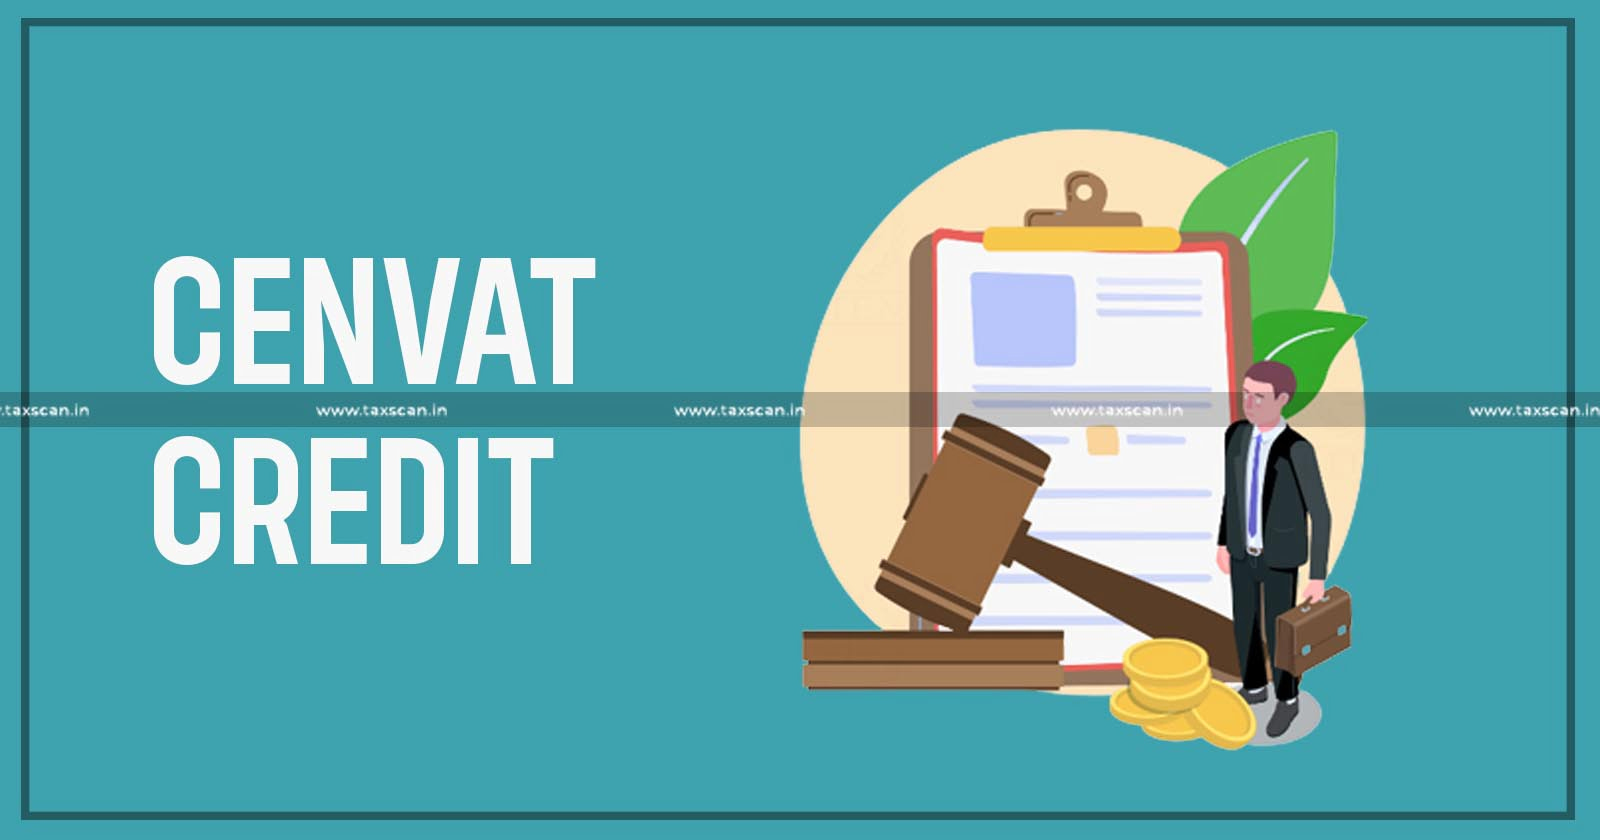 Claim - Refund - CENVAT Credit - Claim for Refund of CENVAT Credit - Reassessing -taxscan